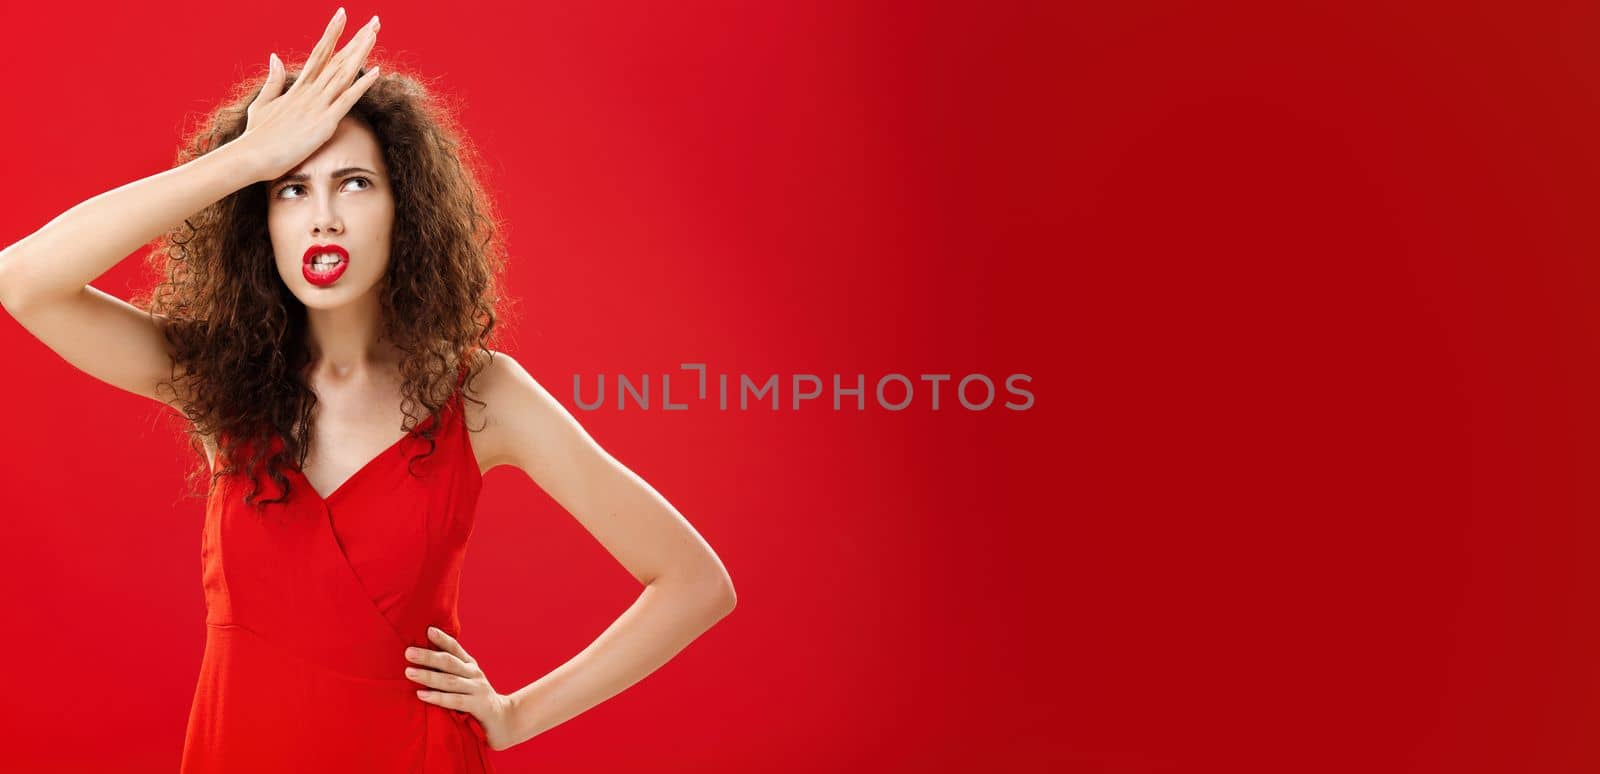 Woman feeling irritated of stupid waiter messing up order punching forehead from annoyance rolling eyes up in anger frowning, swearing saying cursing words displeased standing in red dress. Emotions and body language concept